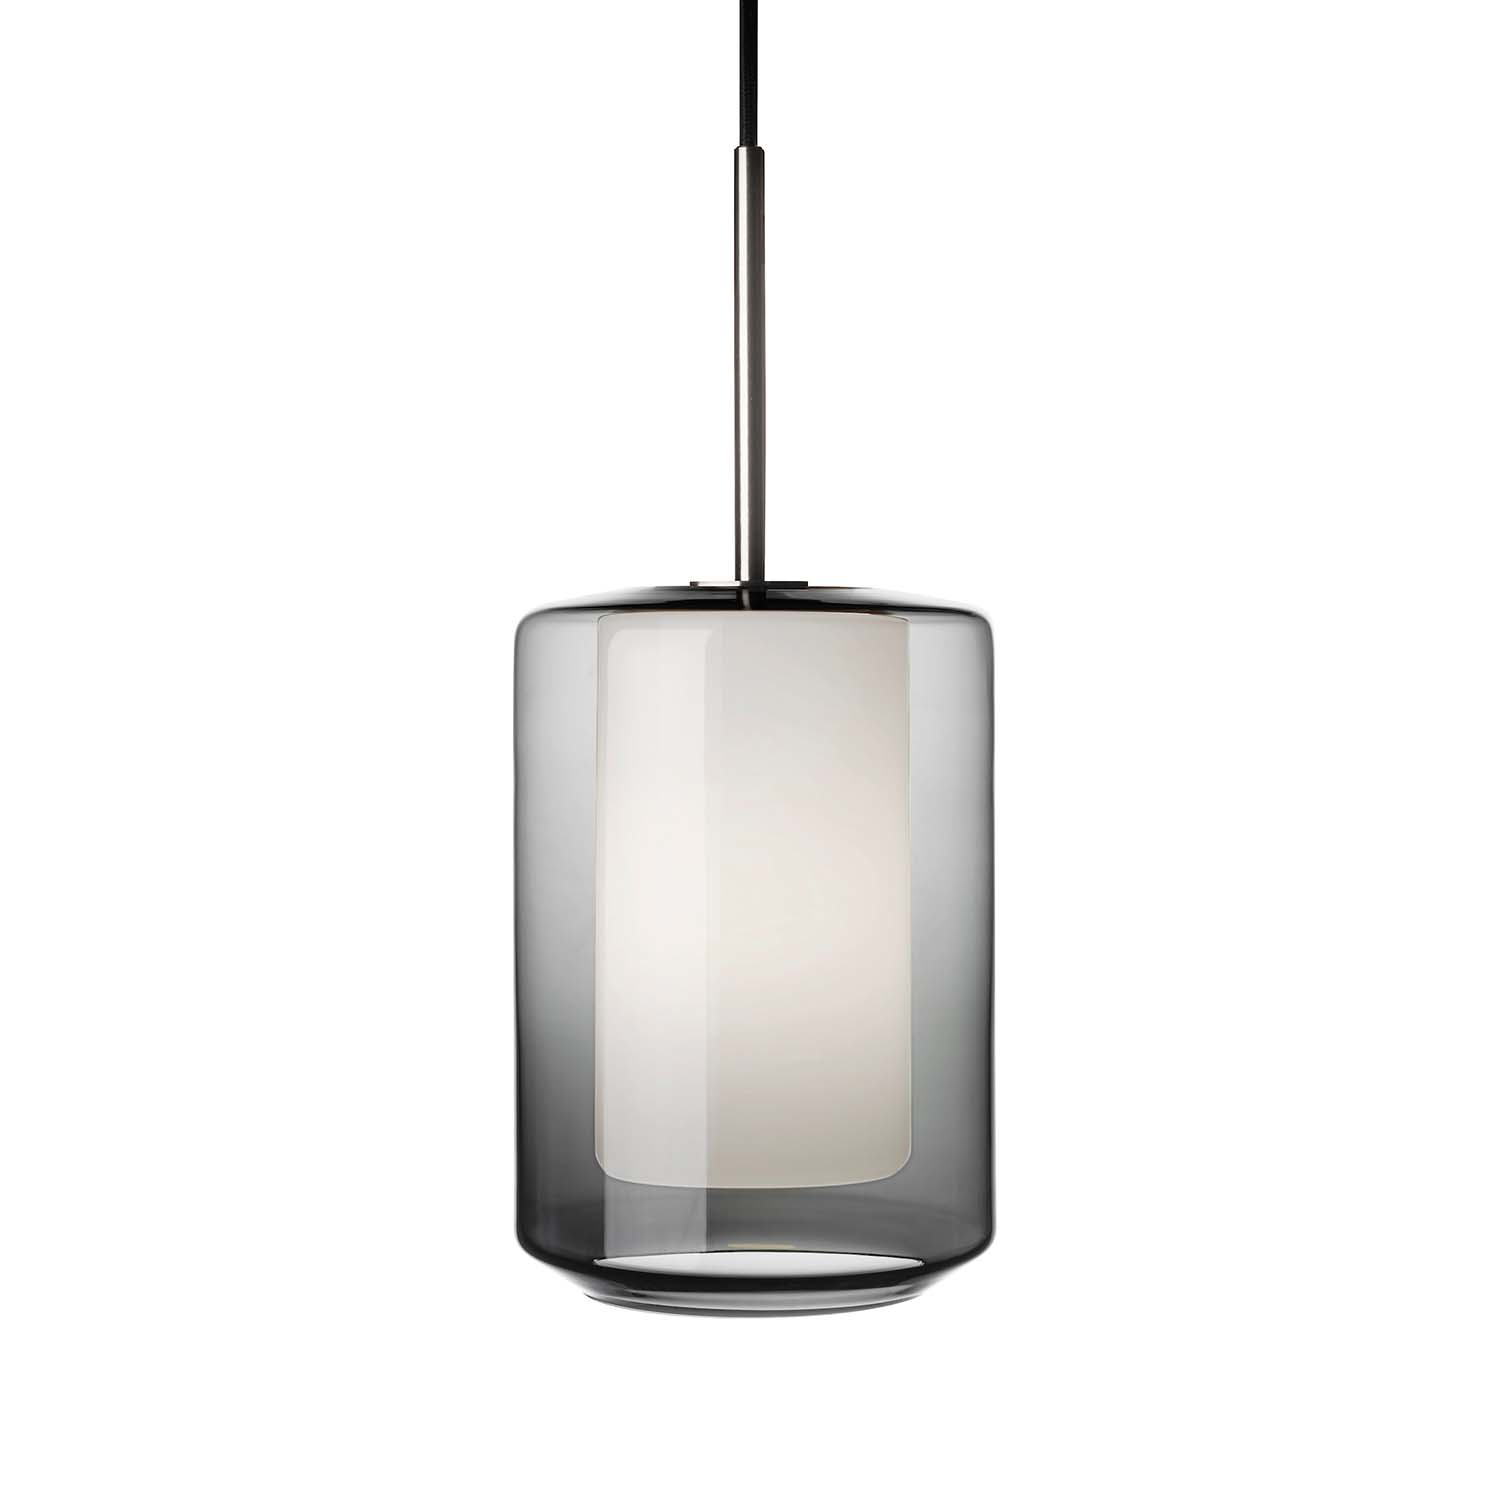 ARCHIVE 4245 - Handcrafted and designer blown smoked glass pendant lamp